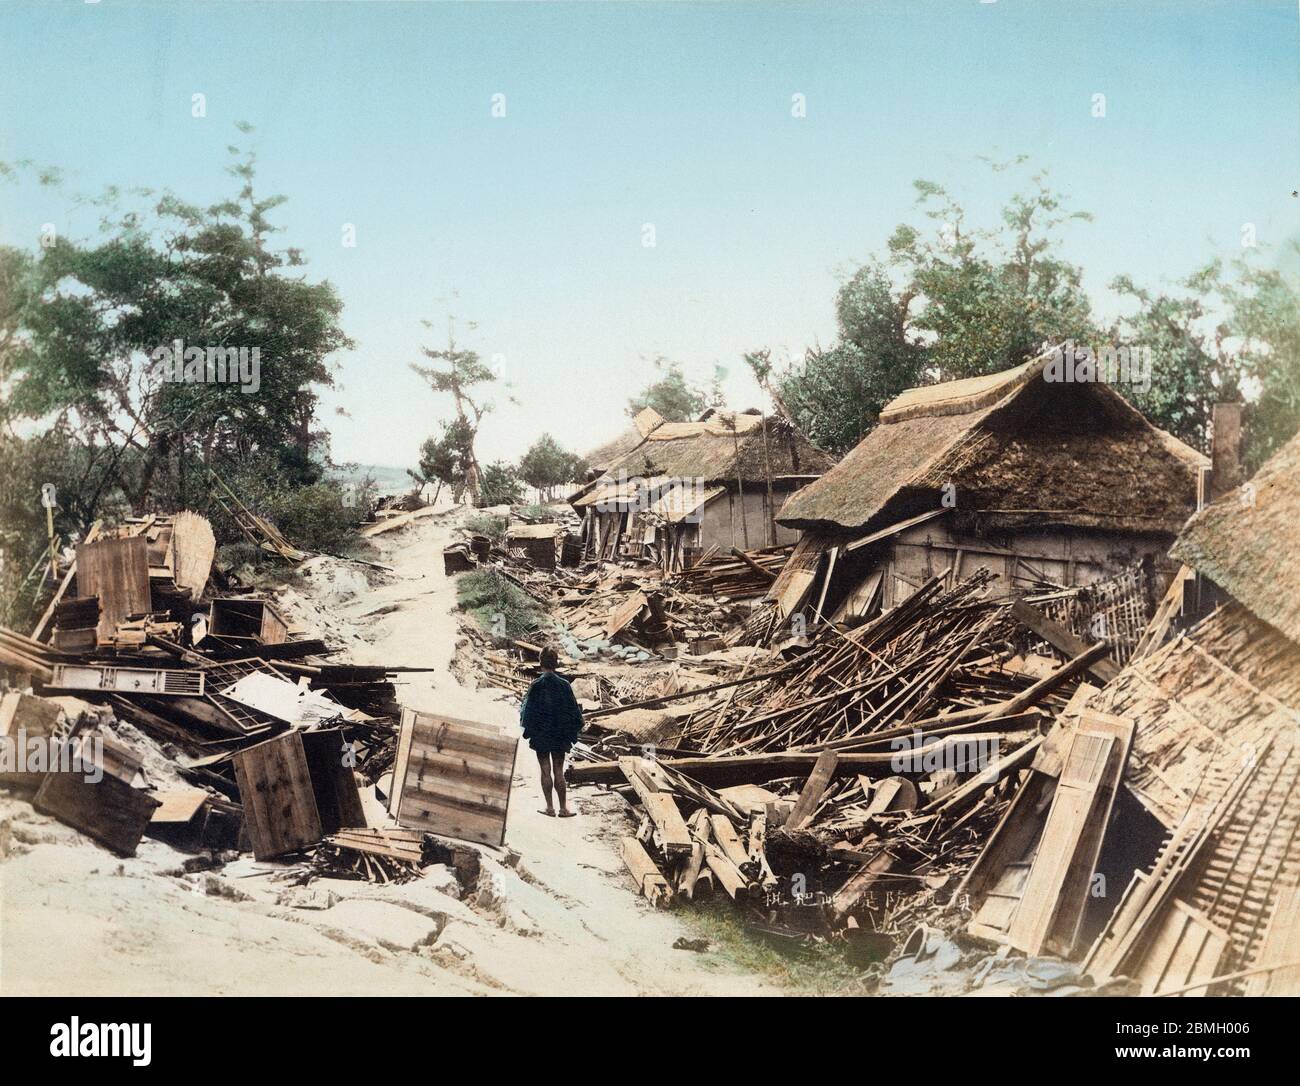 [ 1890s Japan - Nobi Earthquake Destruction ] —   Devastation in Ichinomiya (一の宮村) in Aichi Prefecture caused by the Nobi Earthquake (濃尾地震, Nobi Jishin) of October 28, 1891 (Meiji 24).  Debris is piled up along a cracked road. The Nobi Earthquake measured between 8.0 and 8.4 on the scale of Richter and caused 7,273 deaths, 17,175 casualties and the destruction of 142,177 homes.  It is the largest recorded quake in inland Japan. It jumpstarted the study of seismology in Japan and proved that earthquakes are caused by fault lines.  19th century vintage albumen photograph. Stock Photo